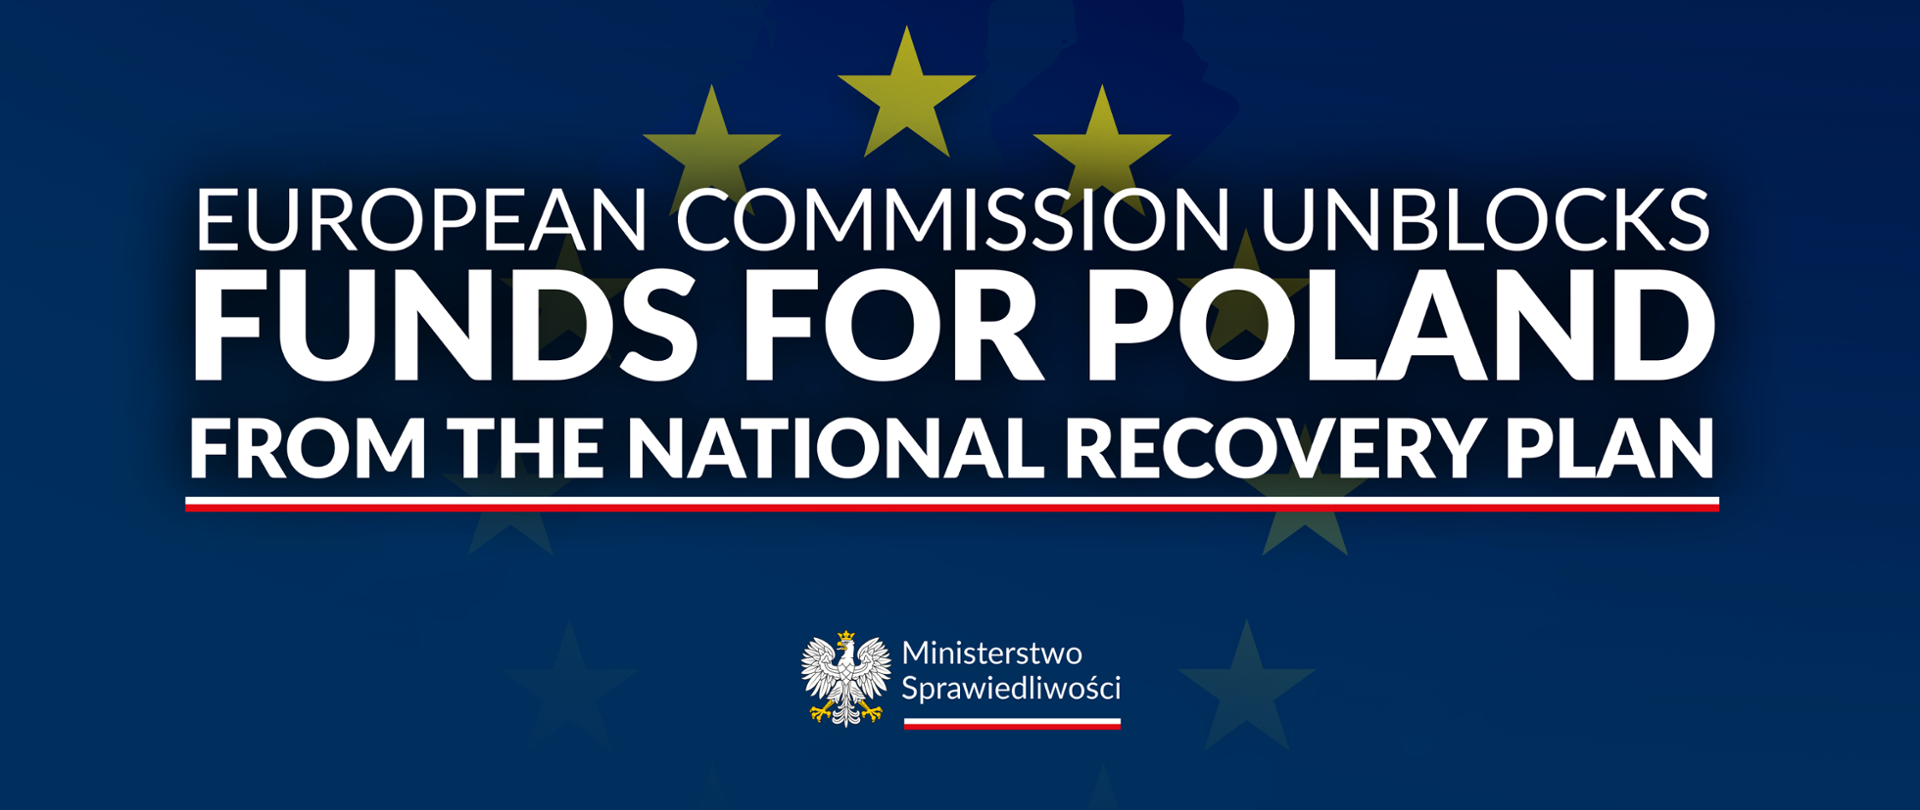 European Commission unblocks funds for Poland from the National Recovery Plan